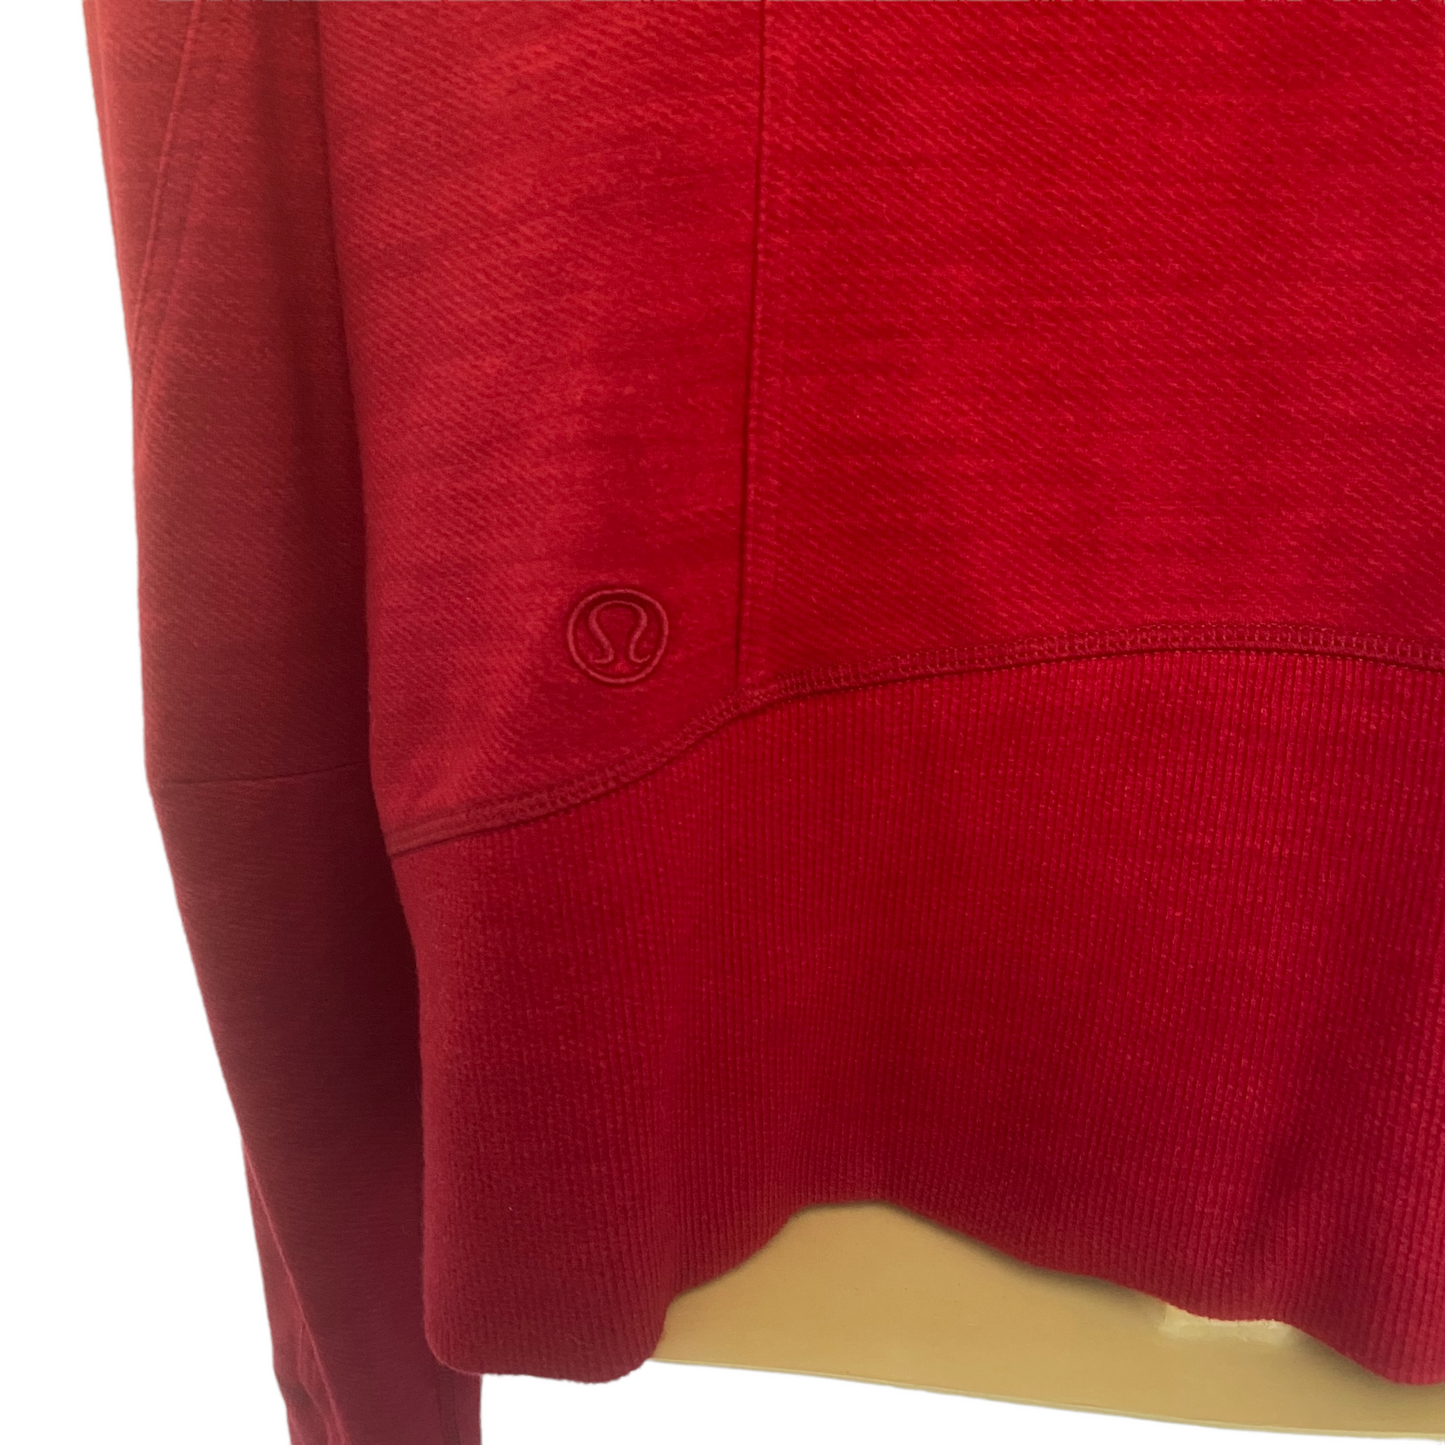 Lululemon Carry And Go Hoodie Jacket Red Size 12